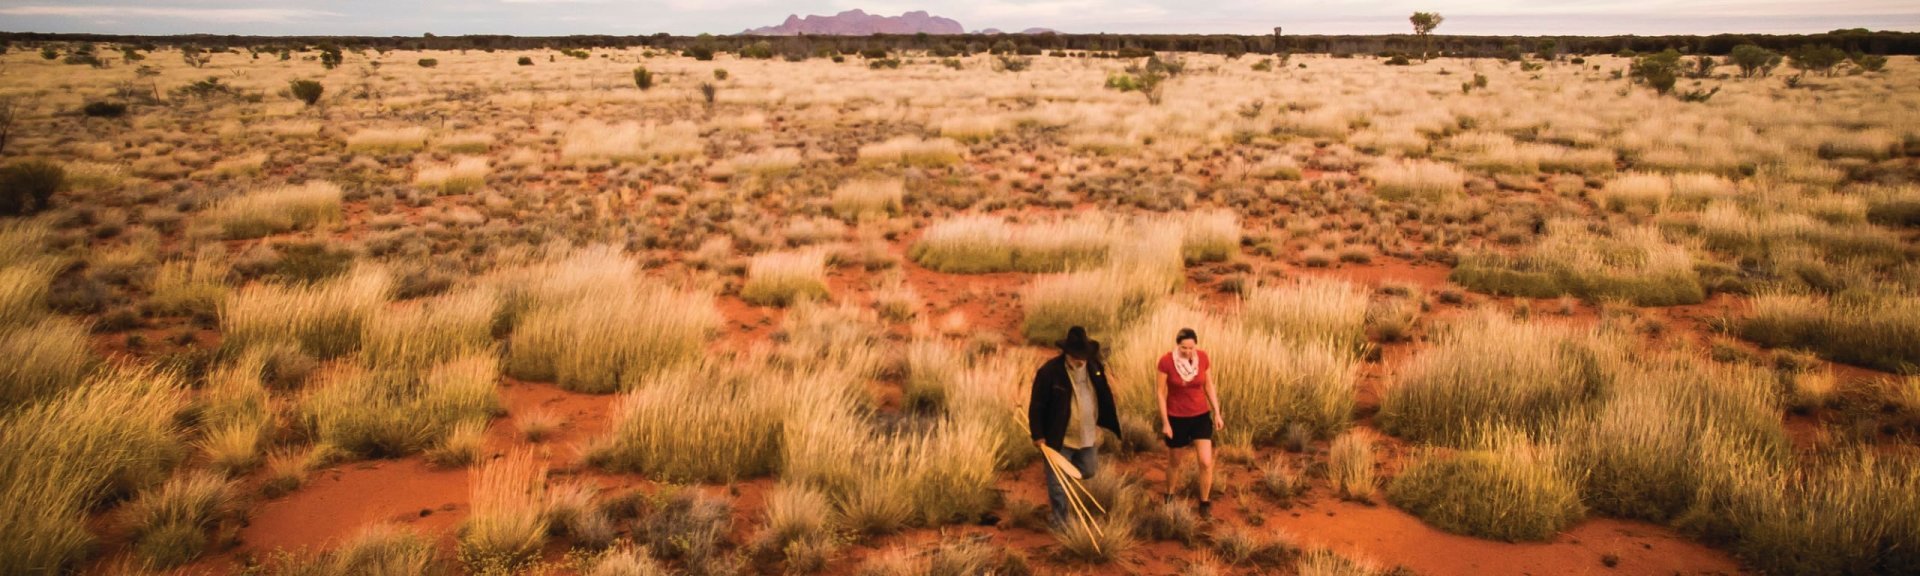 Learning about Culture. Photo: Tourism Australia